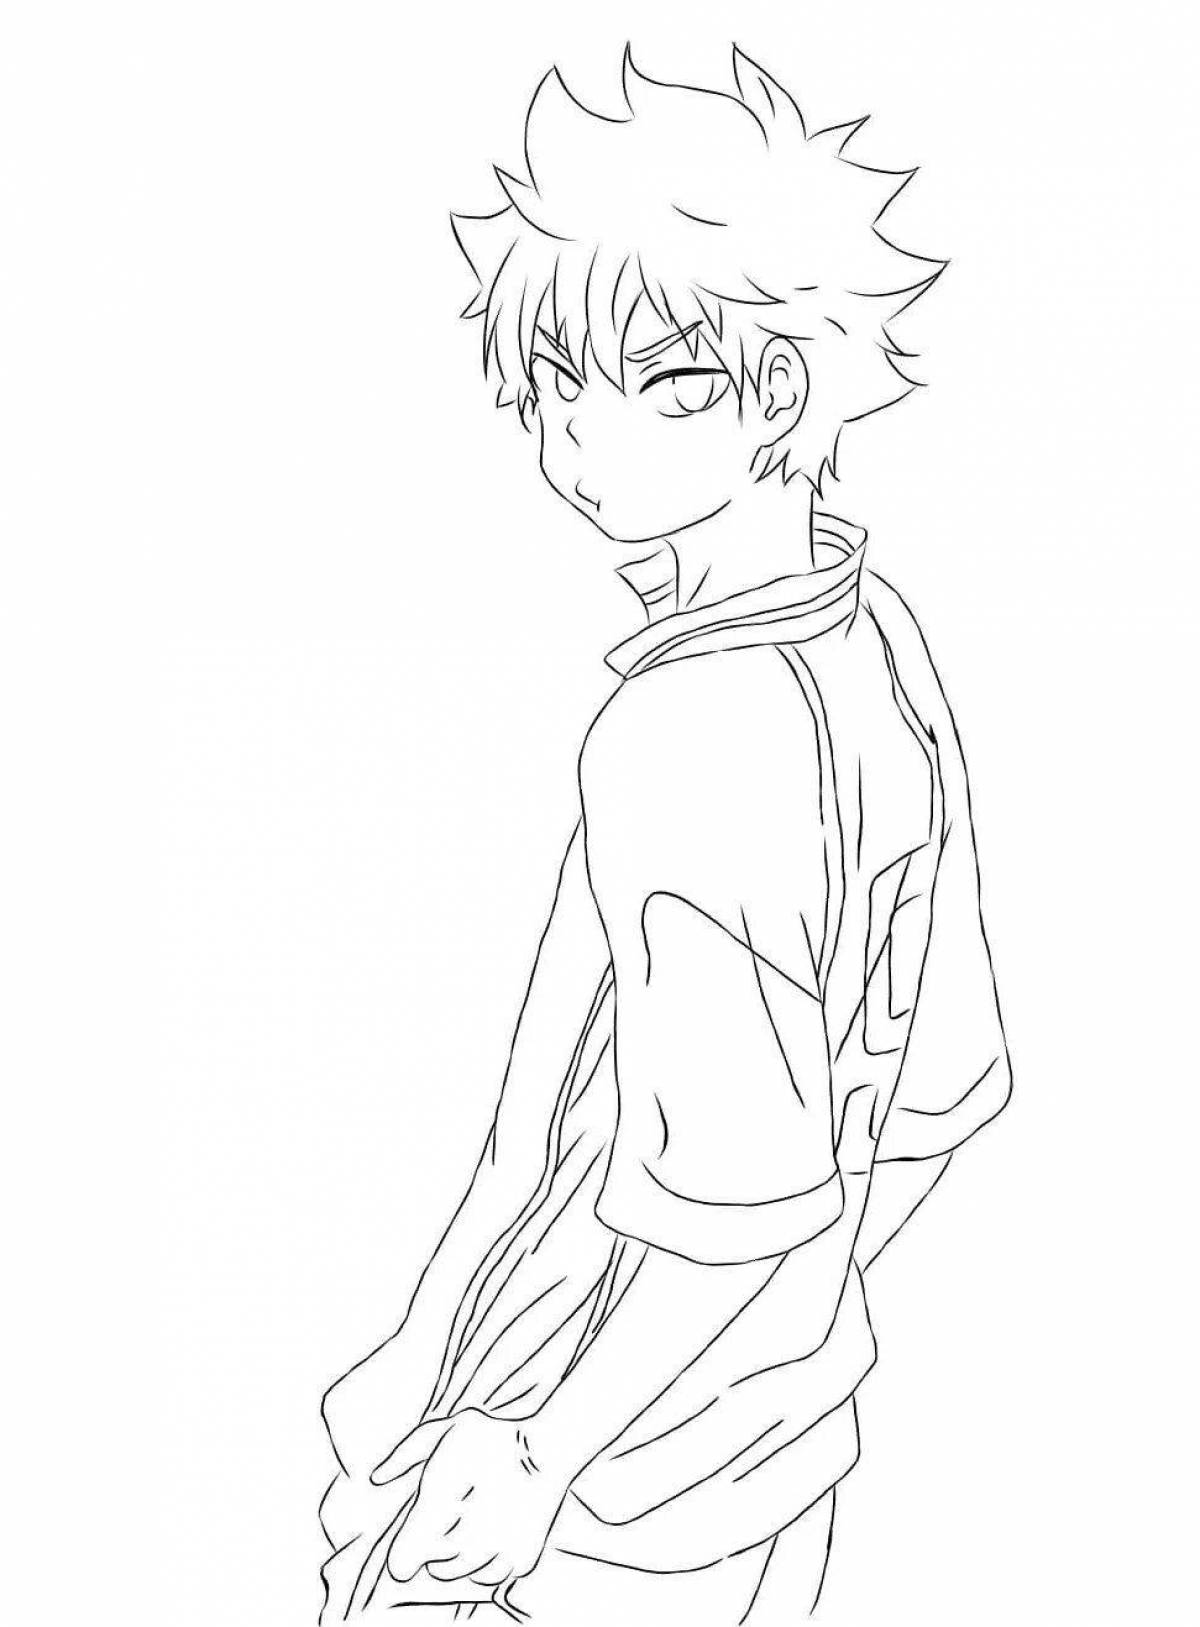 Hinata's amazing volleyball coloring page